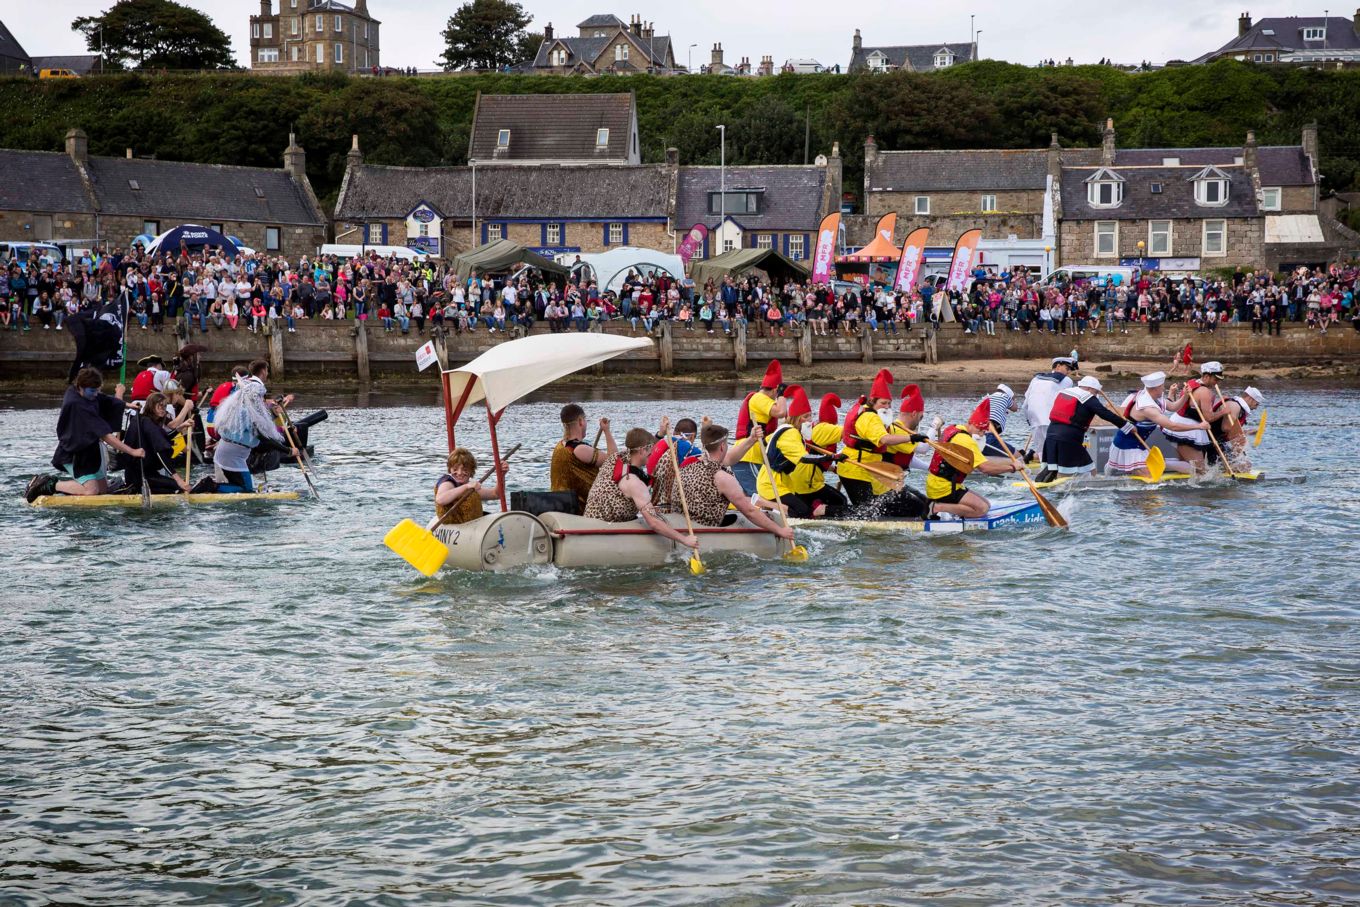 Rafts taking part in the Lossiemouth Raft Race